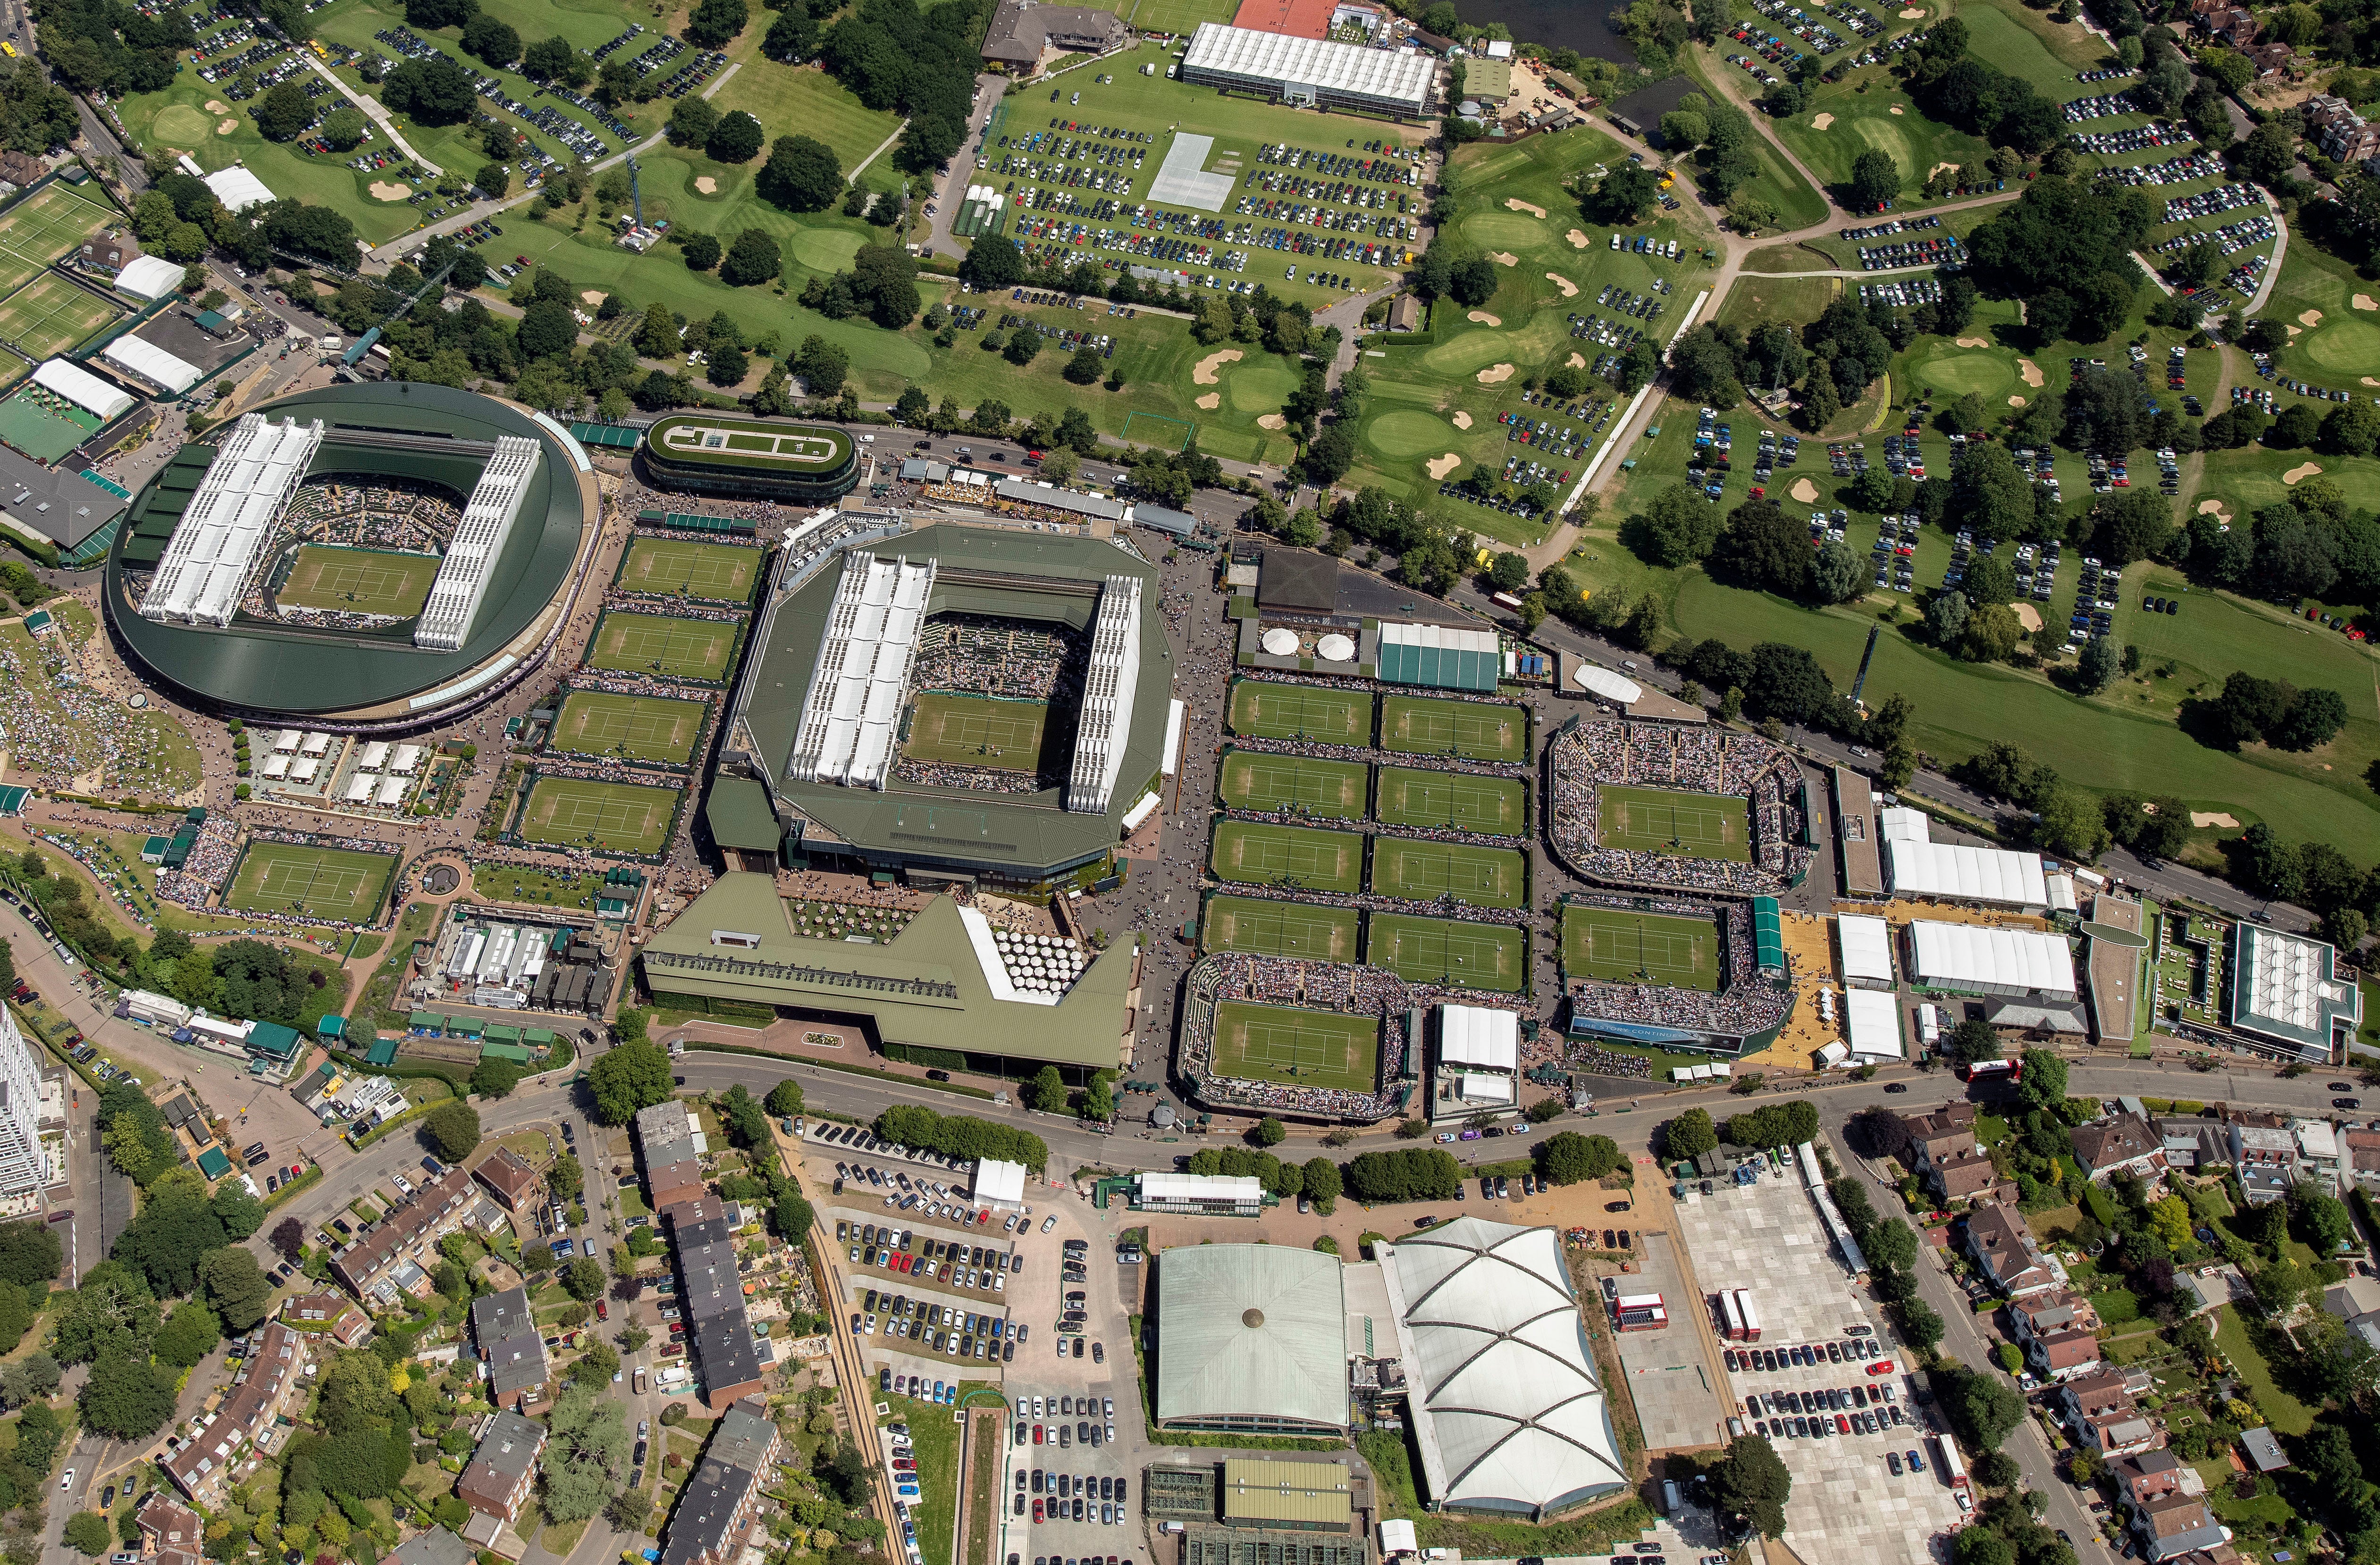 AELTC has bought the lease for the neighbouring Wimbledon Park Golf Club